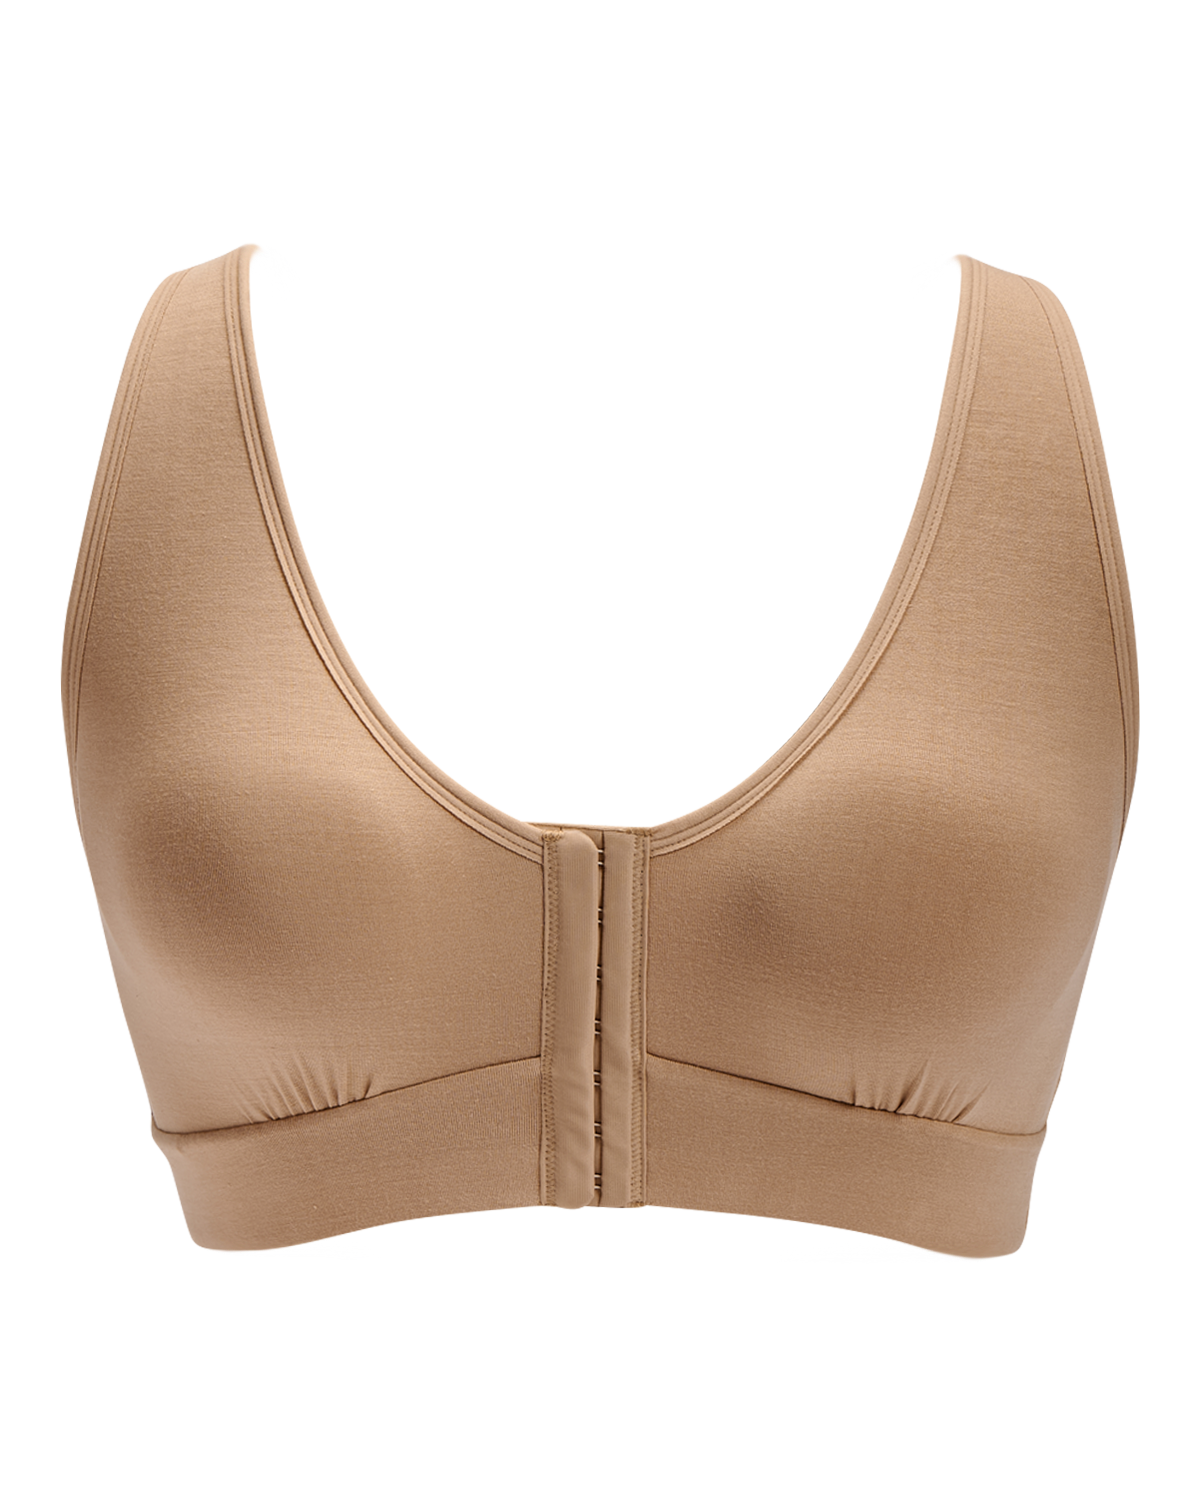 Rora Recovery Front Closure Bra - Anaono – The Pink Boutique